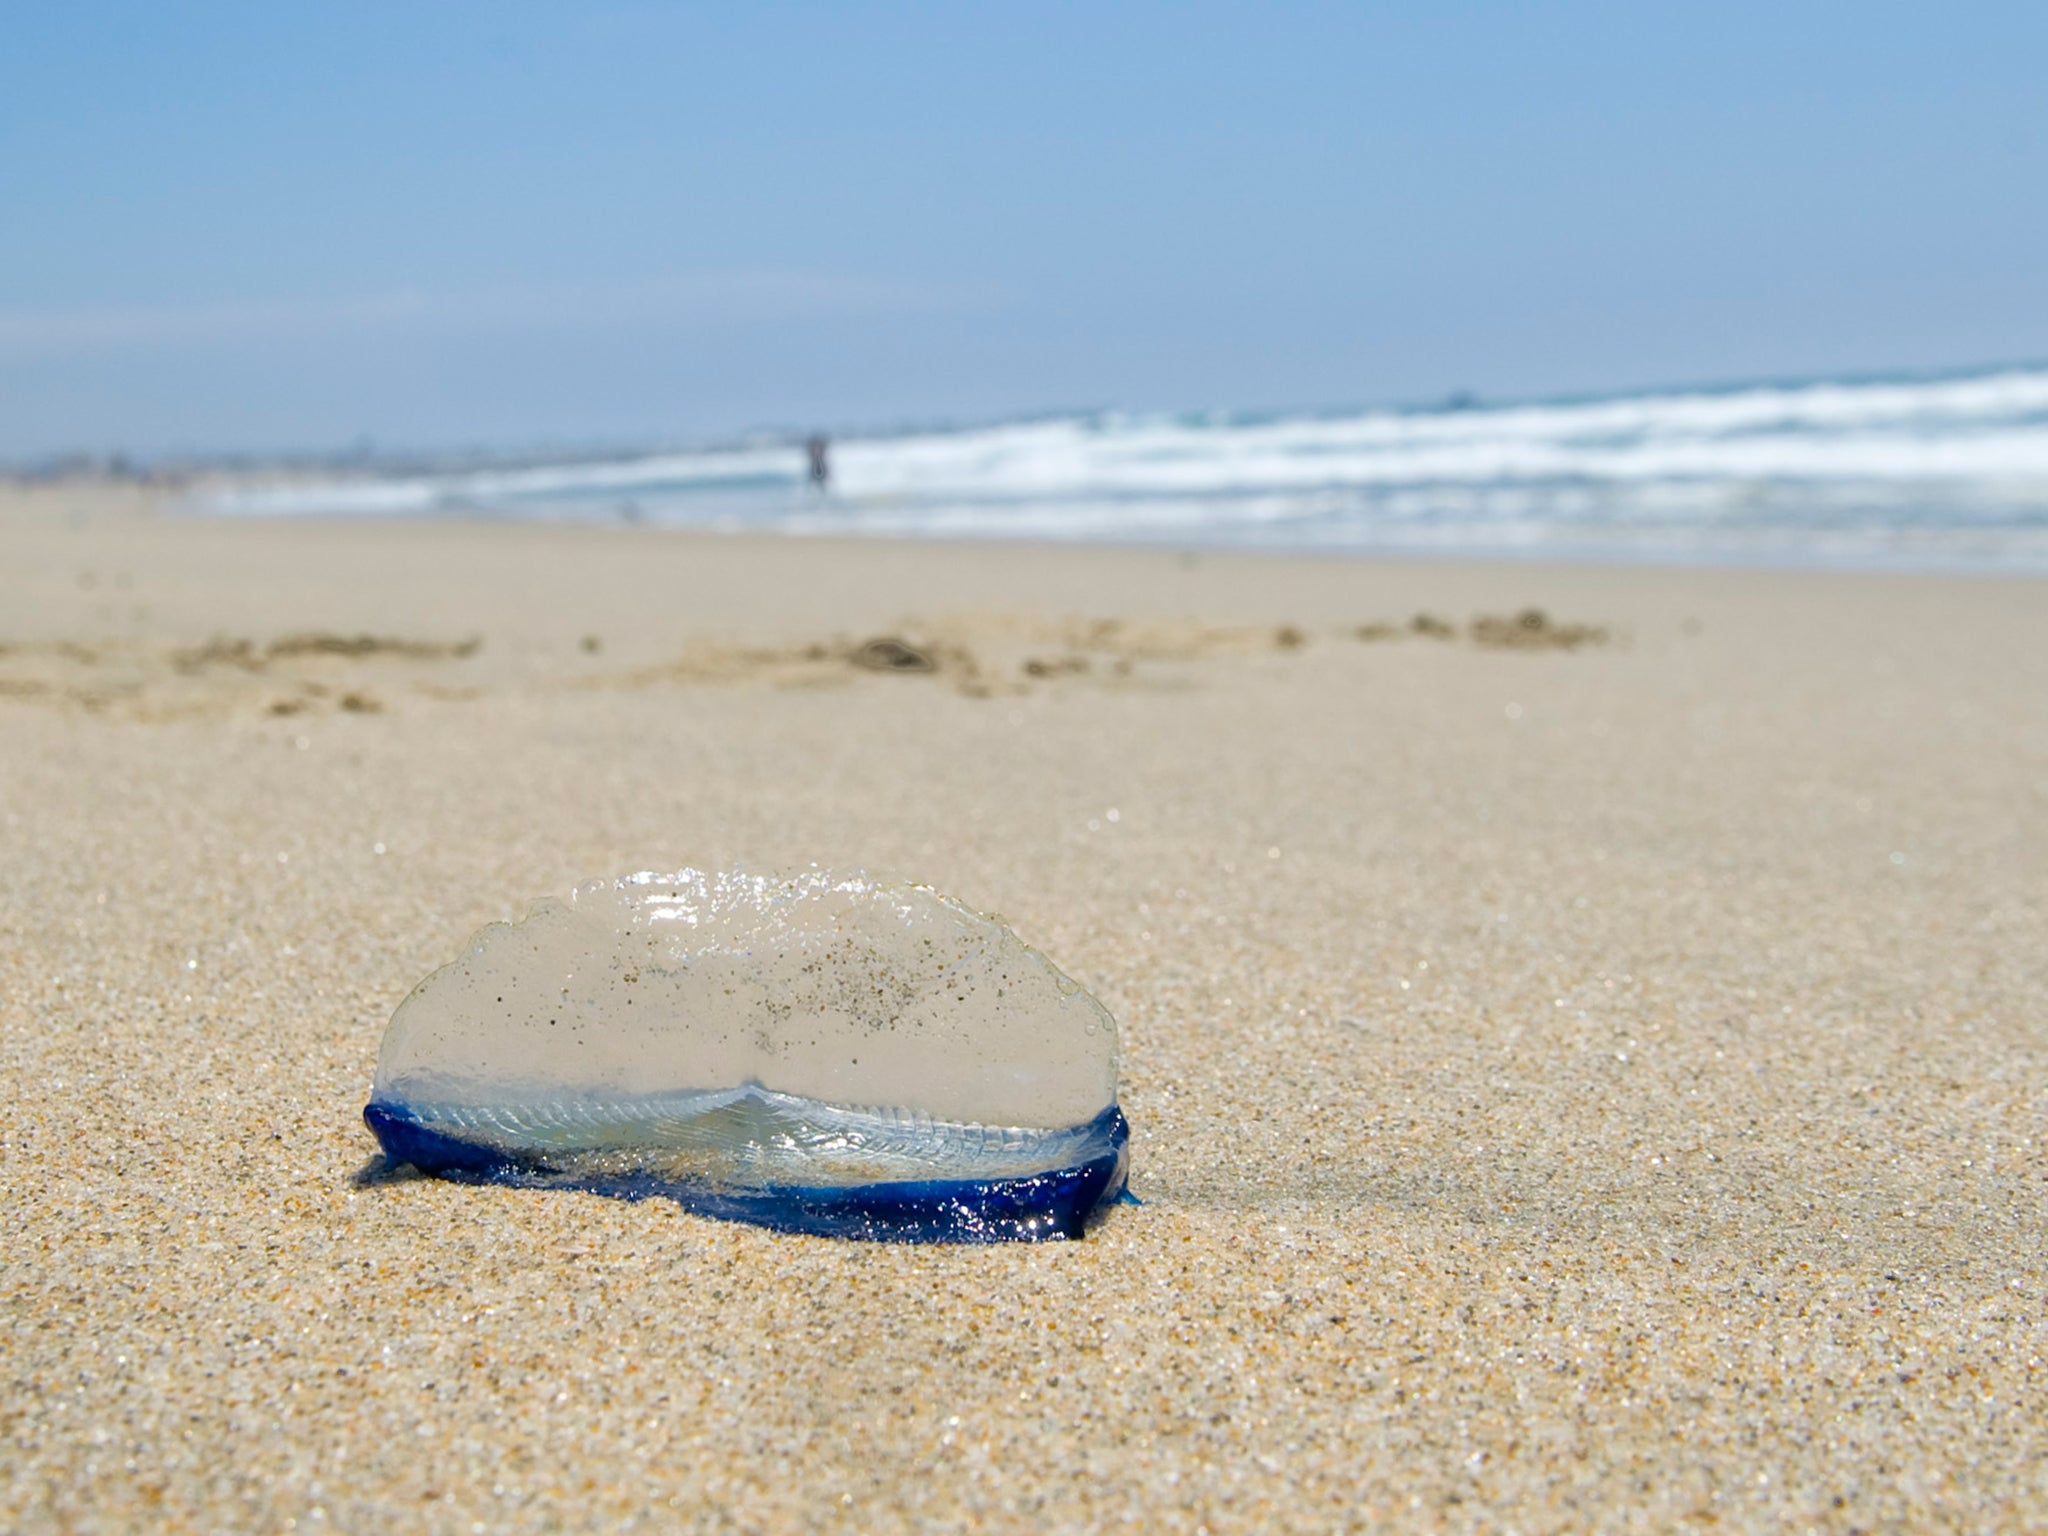 A by-the-wind-sailor, or Velella, jellyfish lies on the beach in Newport Beach, Calif. on Thursday, Aug. 21, 2014. The creatures, harmless to humans, have been washing up on shore in Southern California since the beginning of the week. 